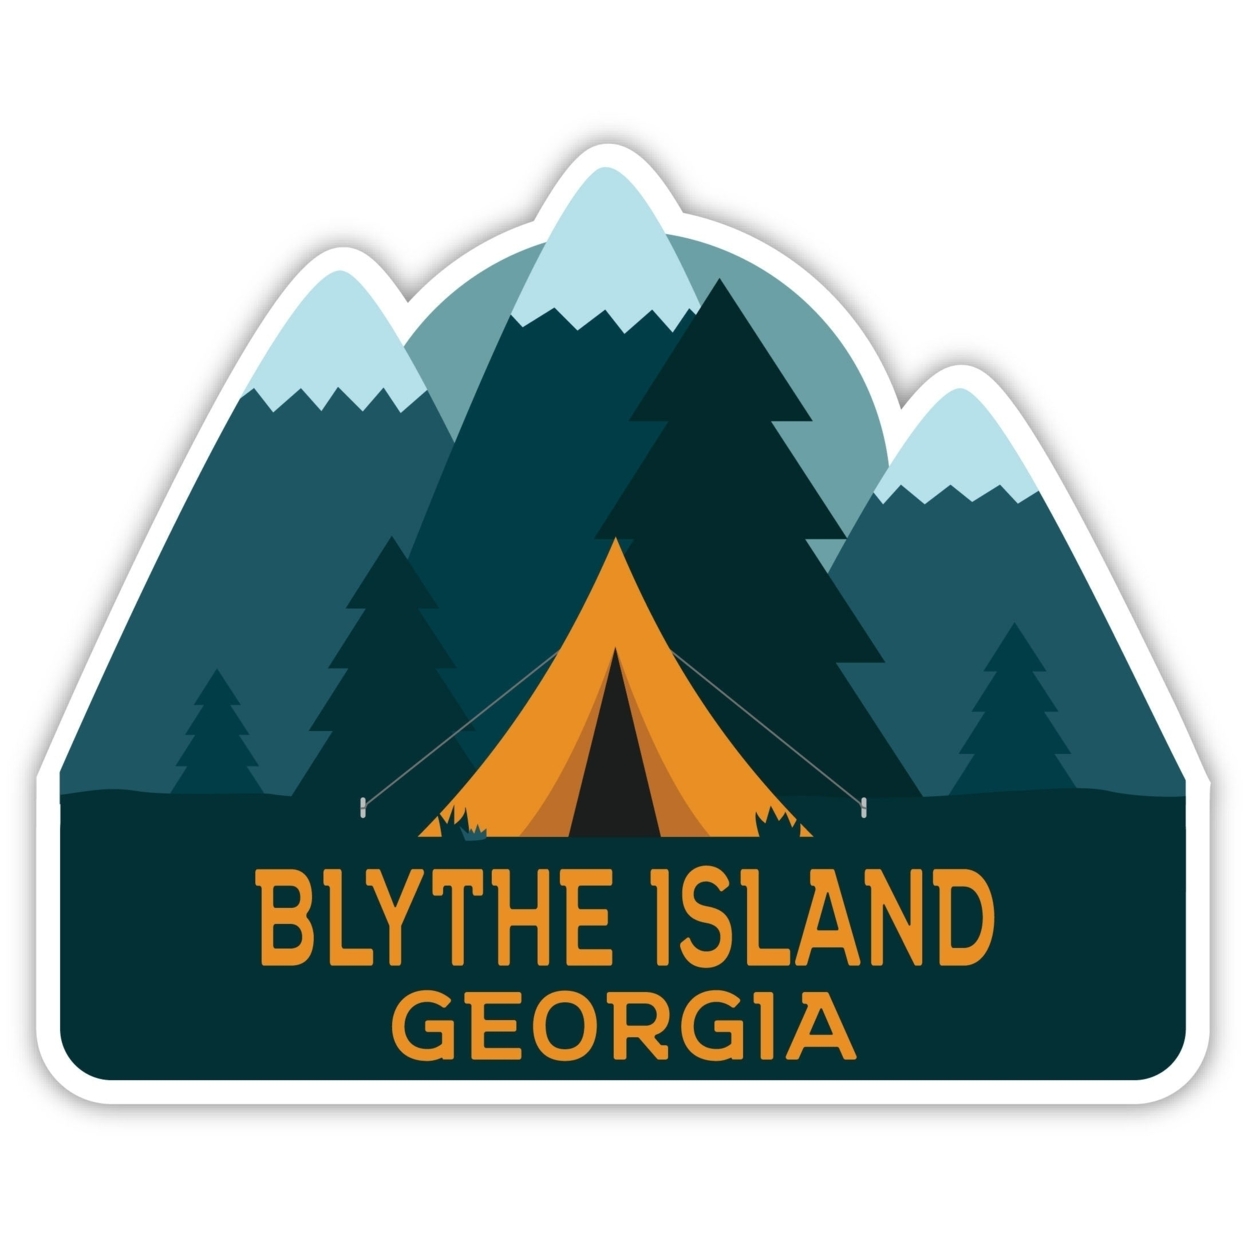 Blythe Island Georgia Souvenir Decorative Stickers (Choose Theme And Size) - 4-Pack, 12-Inch, Tent